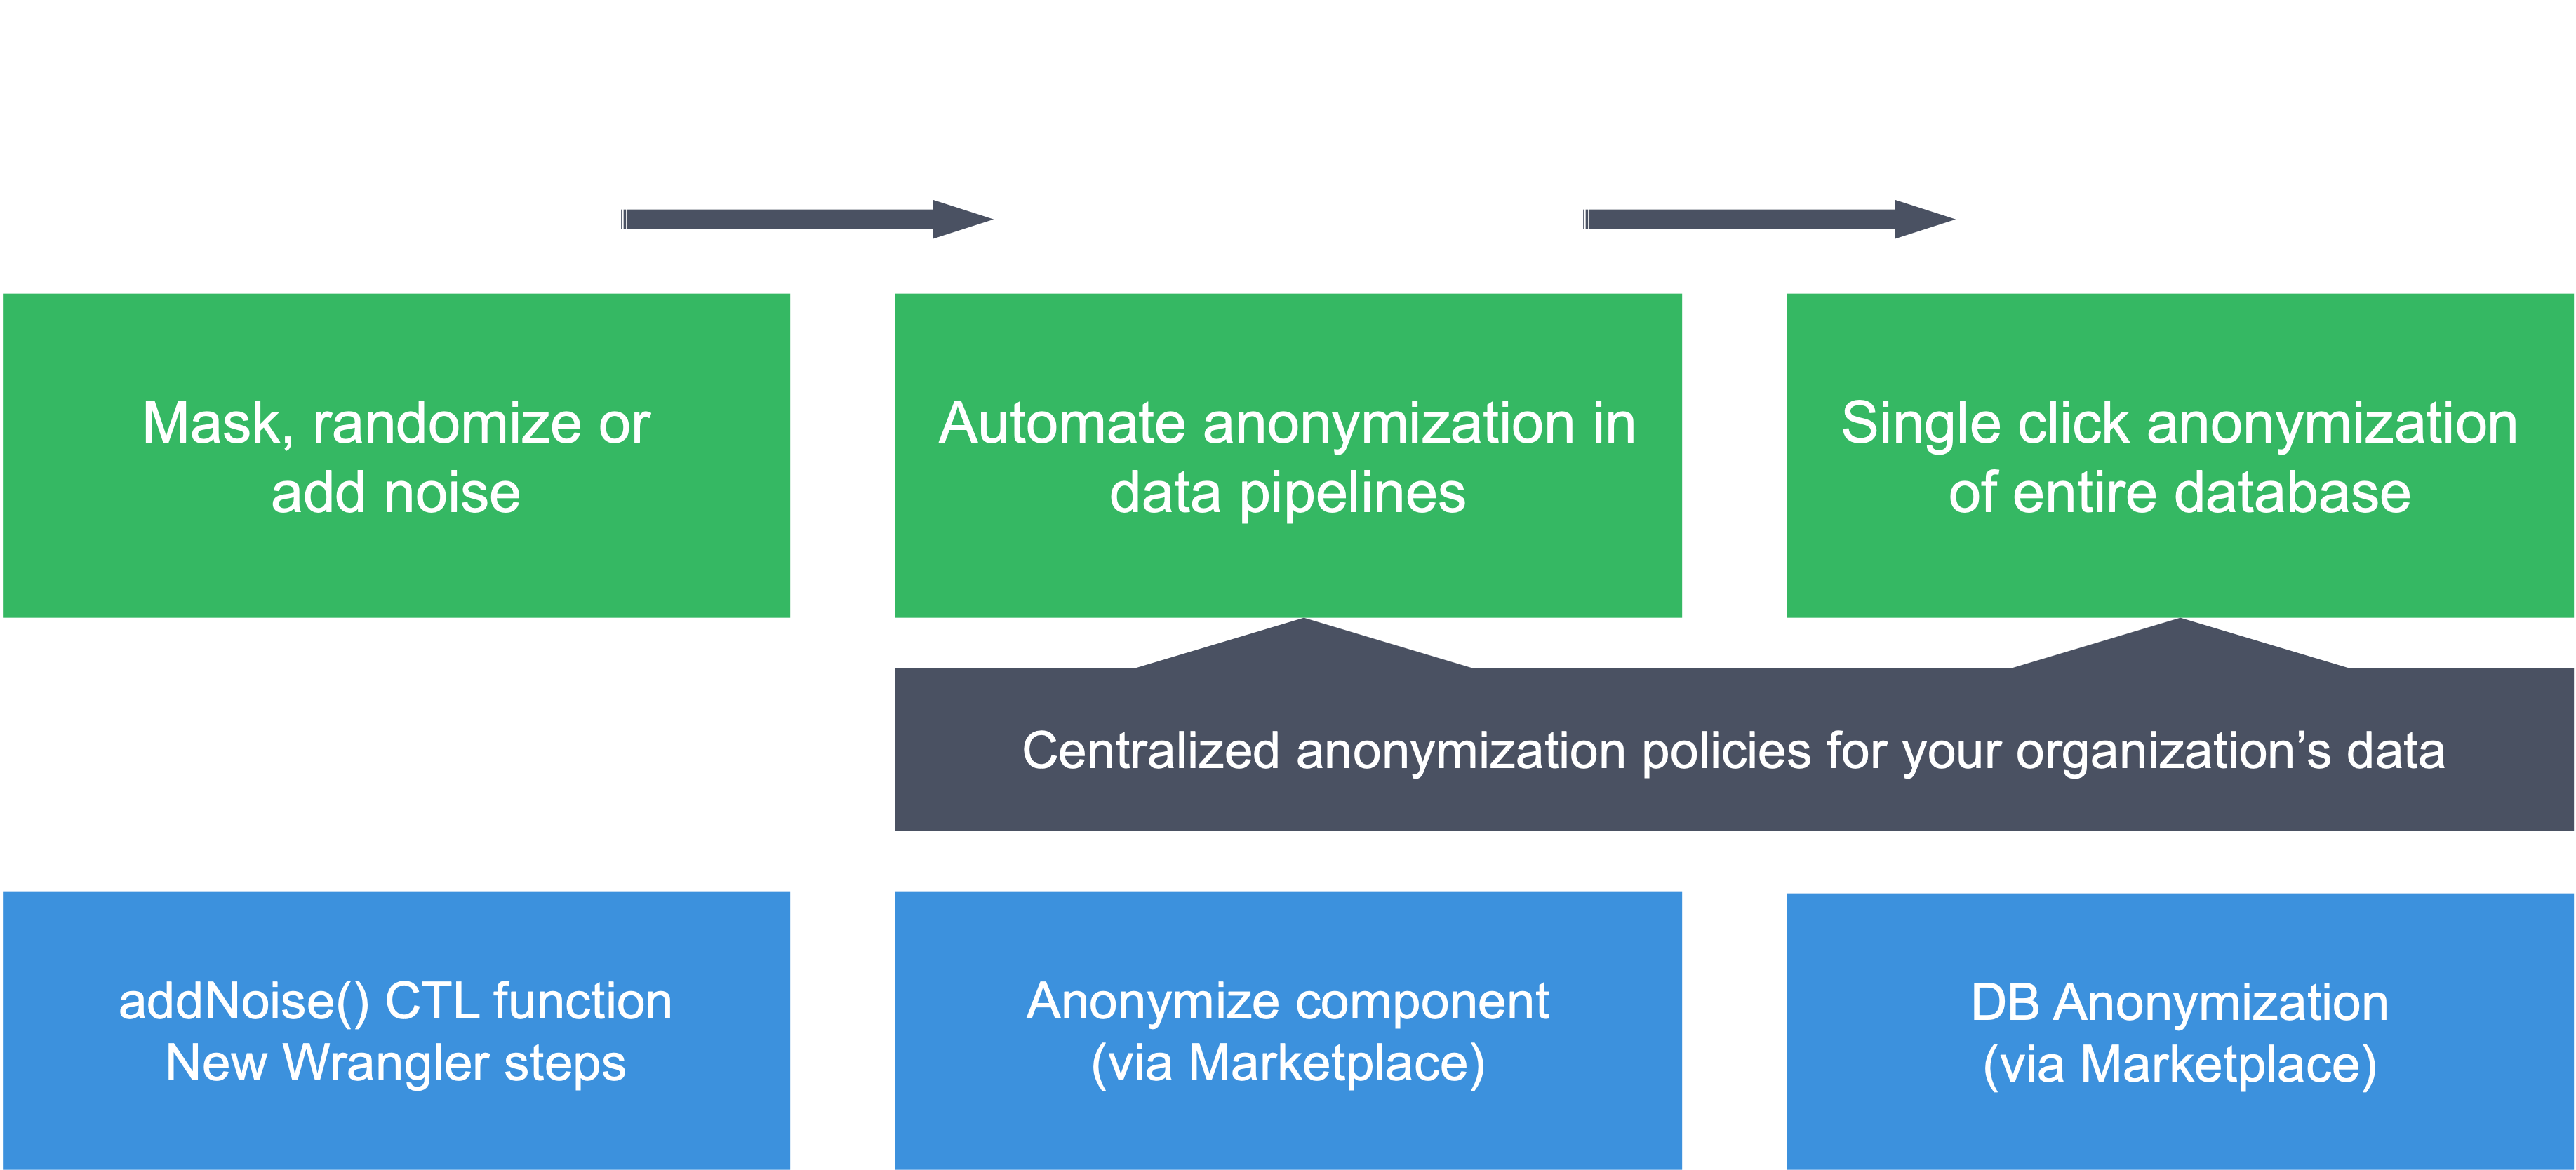 Anonymize your data at any level - column, record or database